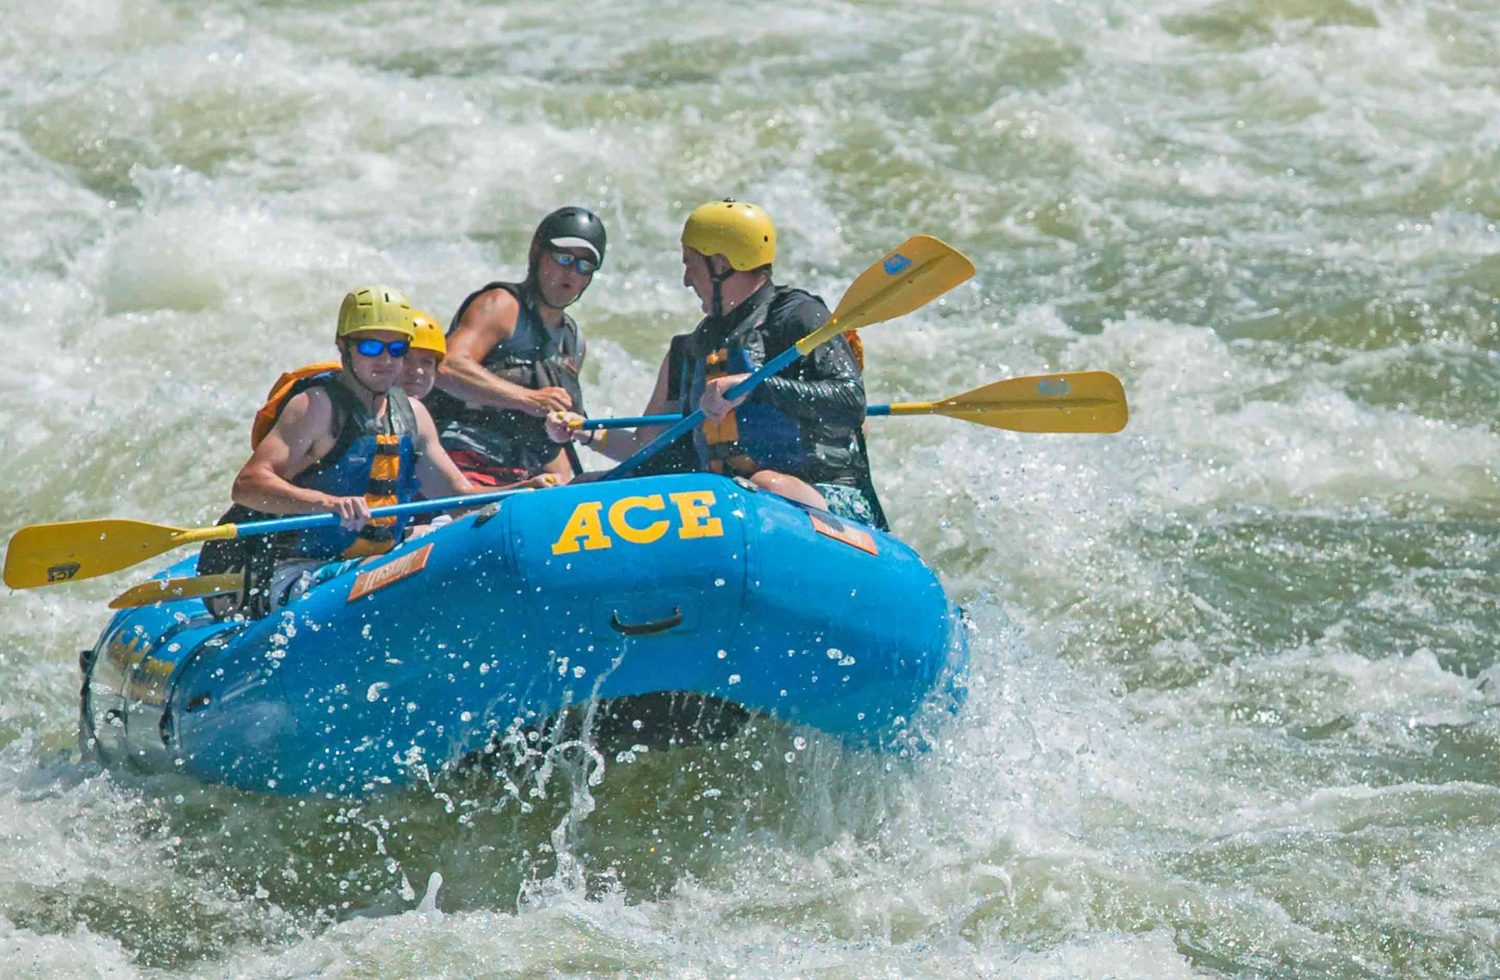 Most Exciting Rafting Trip - ACE Adventure Resort